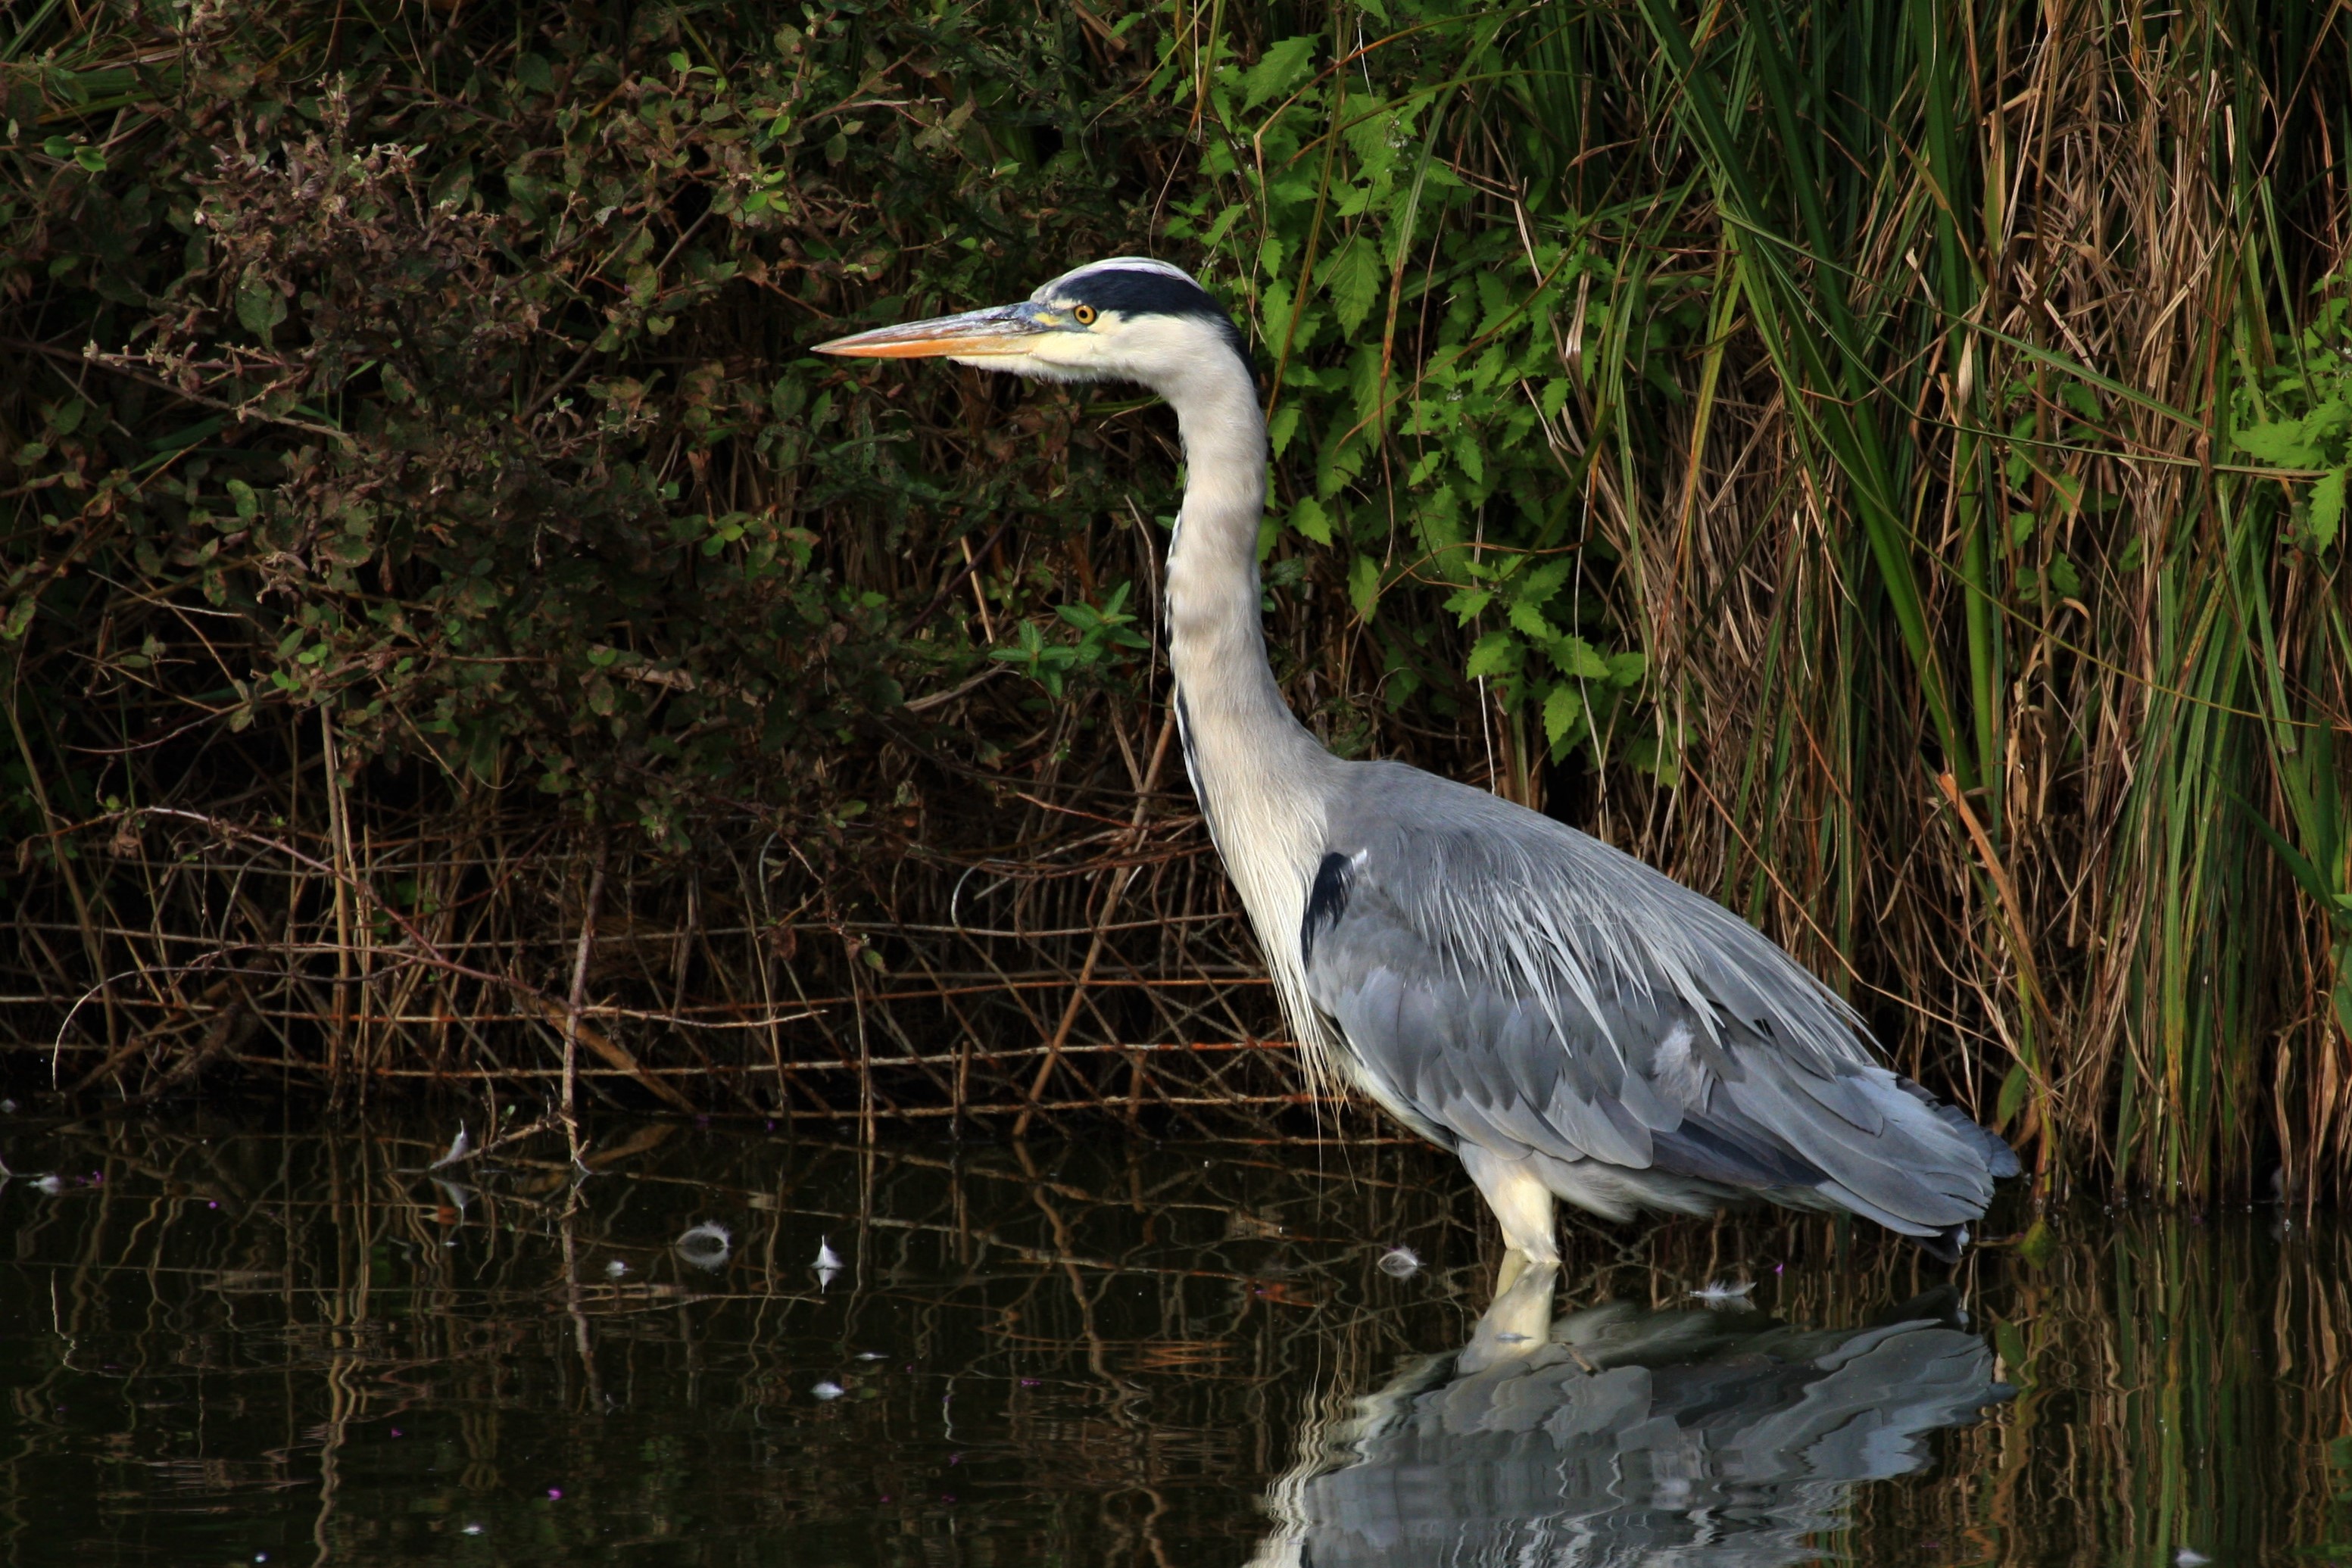 Pistonheads - The image features a striking blue heron standing tall on the bank of a body of water. The heron, with its long neck and legs, is captured in mid-stride, perhaps walking along the reed-lined shore. It appears to be observing something in the water, possibly a reflection or another aquatic creature. In the background, there's an area of lush greenery, providing a natural backdrop to this serene scene. The overall image gives a sense of tranquility and the beauty of nature.